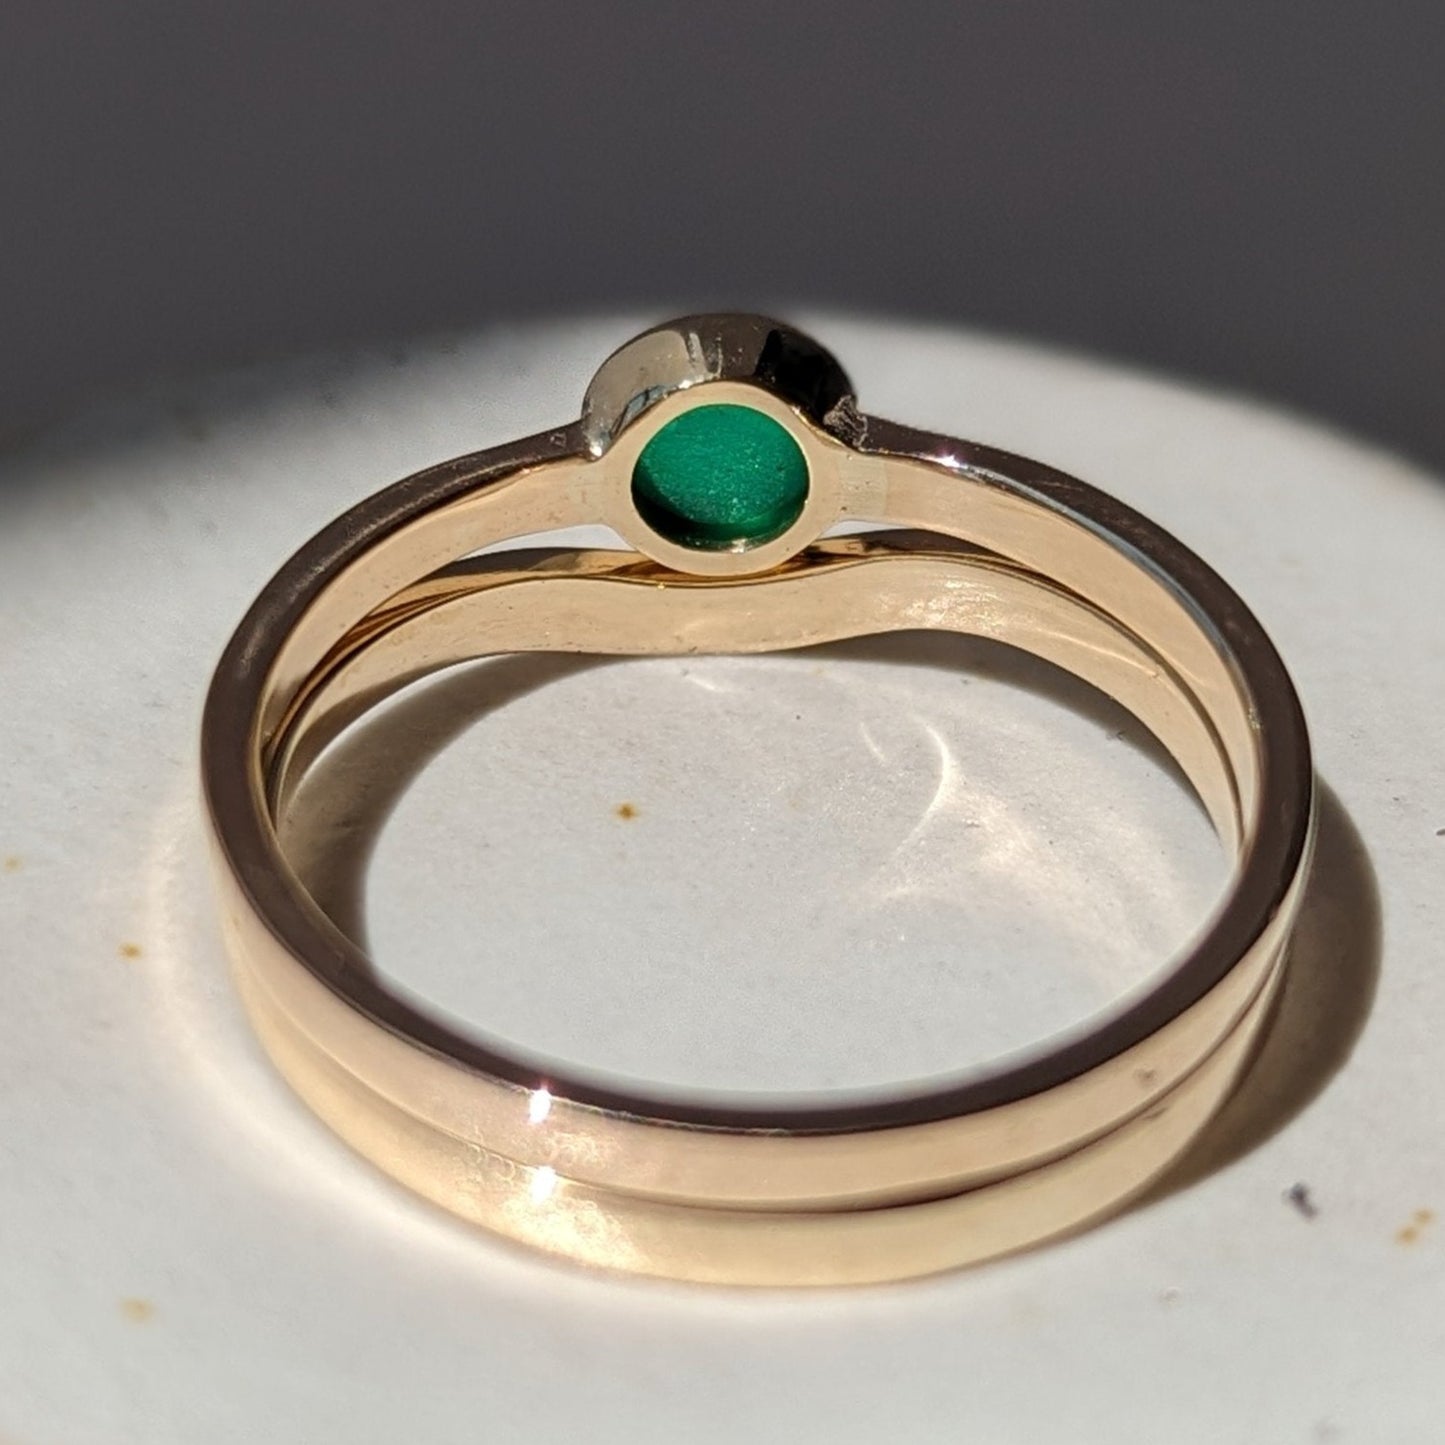 Green Sea Glass Engagement Stacking Rings in 9 Carat Yellow Gold - Booblinka Jewellery